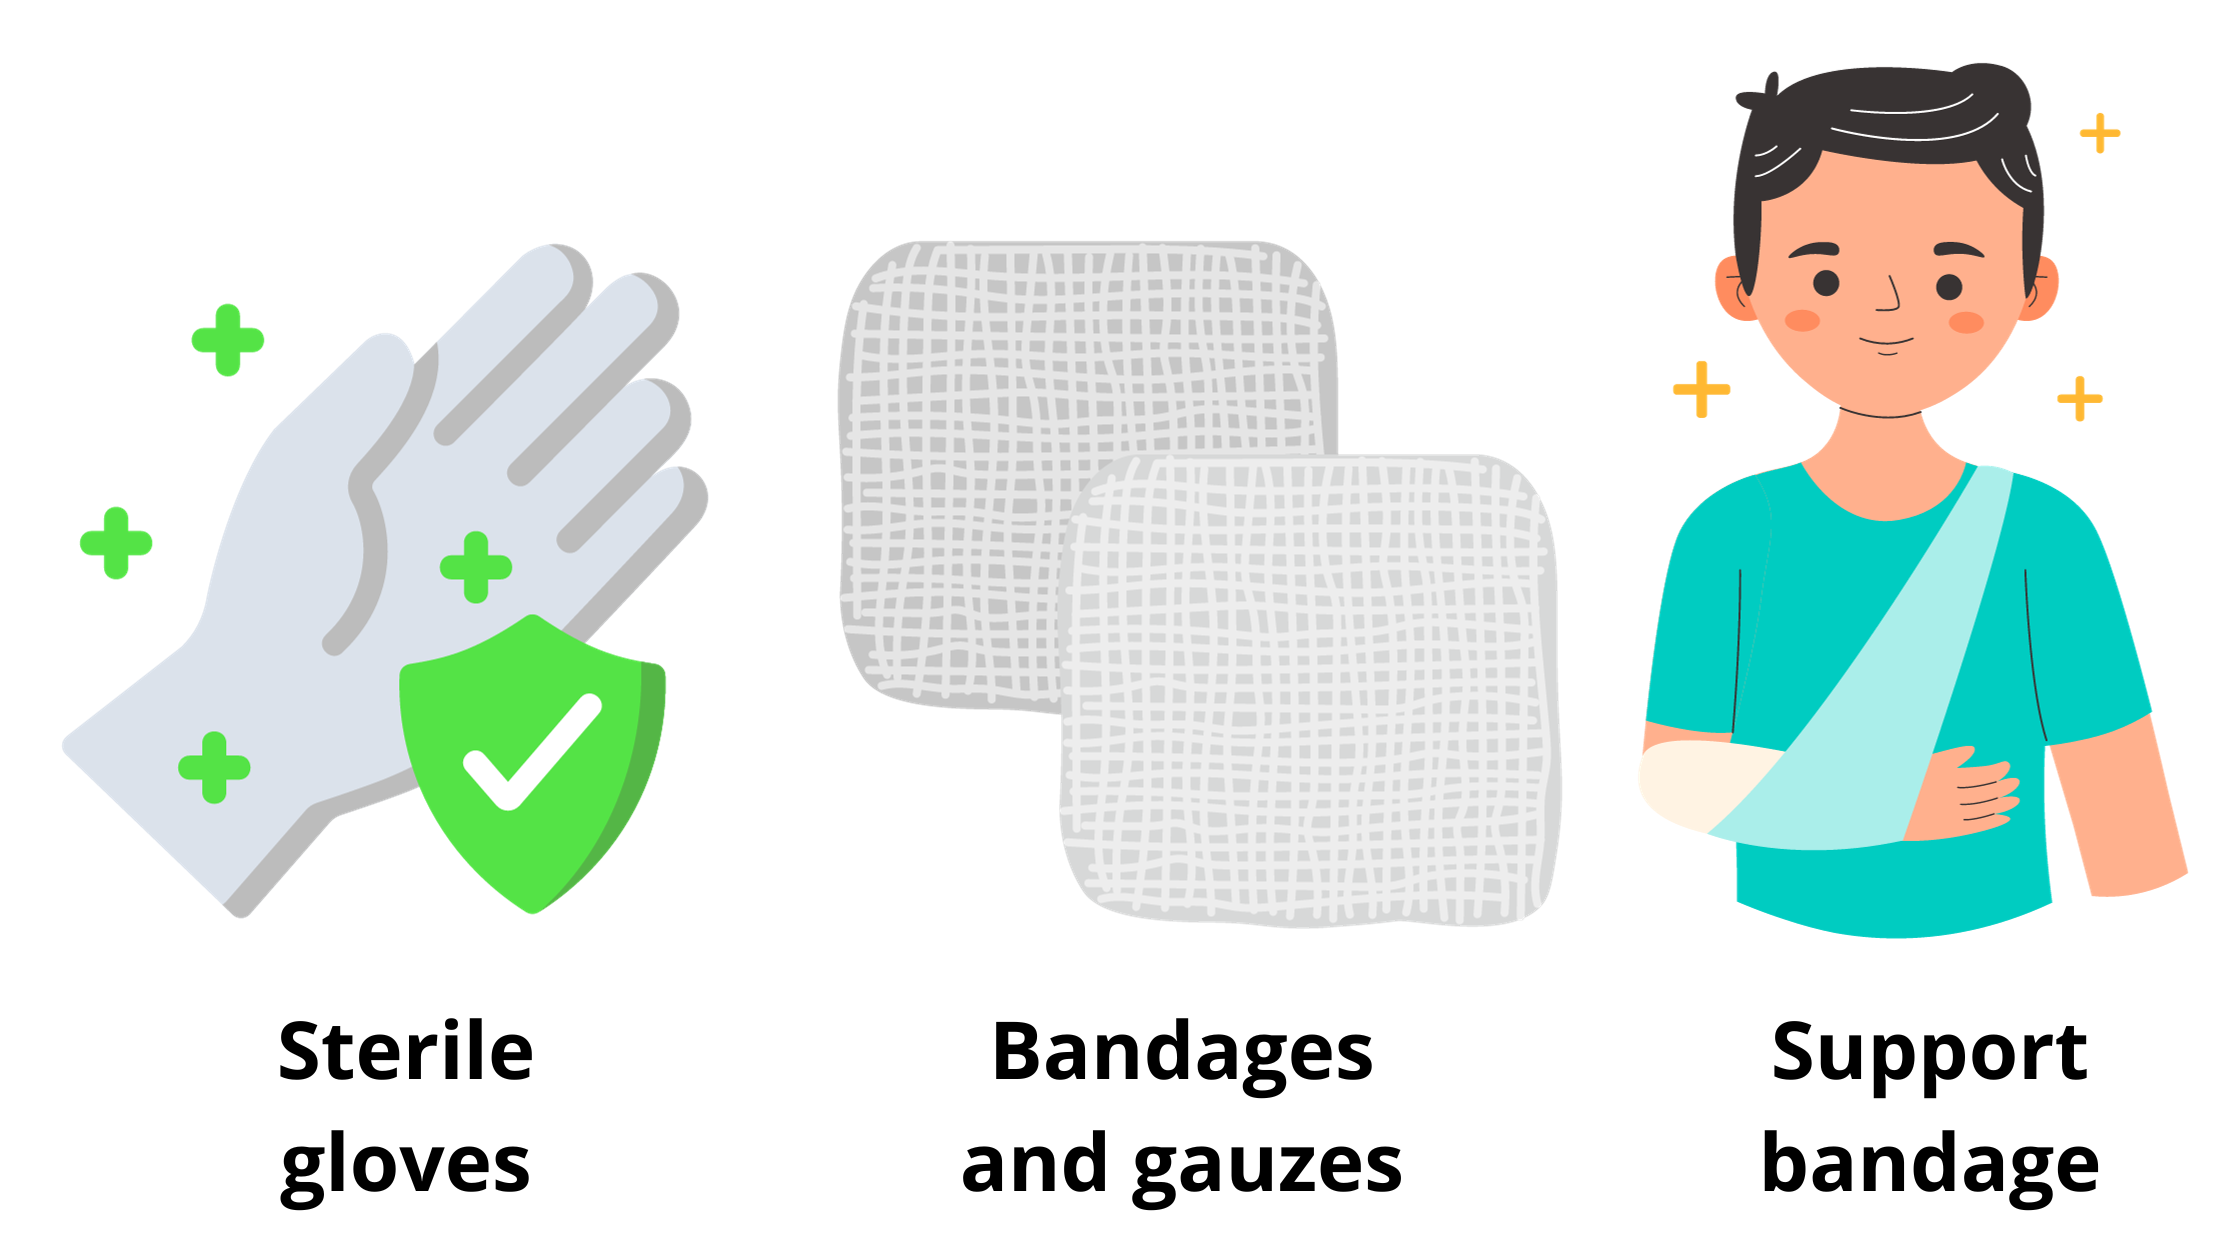 use-of-sterile-material-such-as-gloves-and-gauze-for-the-dressing-of-the-wound-and-immobilization-through-the-use-of-a-bandage-that-supports-the-scapula